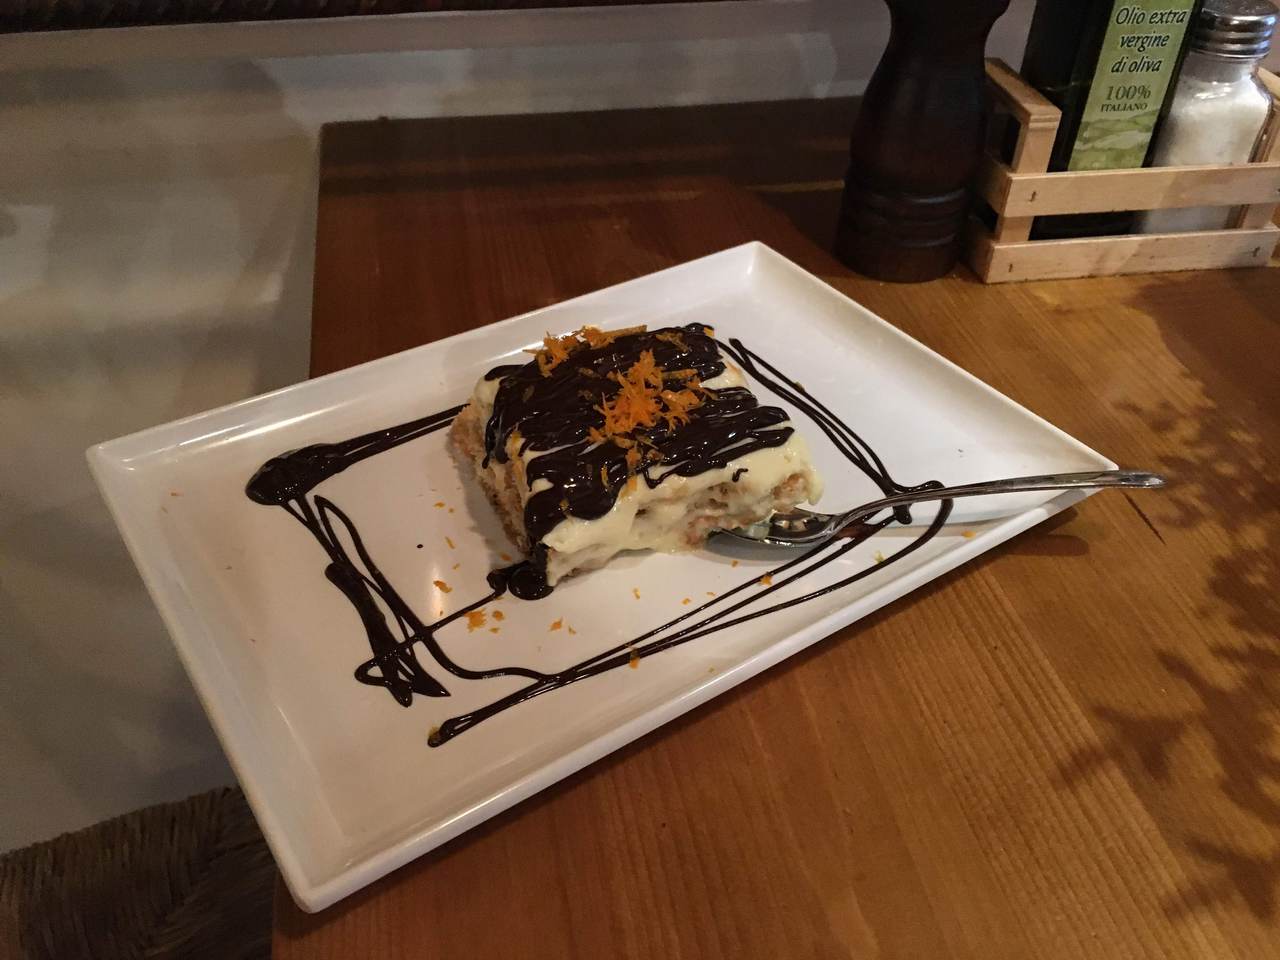 Tiramisu with orange zest and dark chocolate, beautifully arranged on a clean plate with a silver spoon.